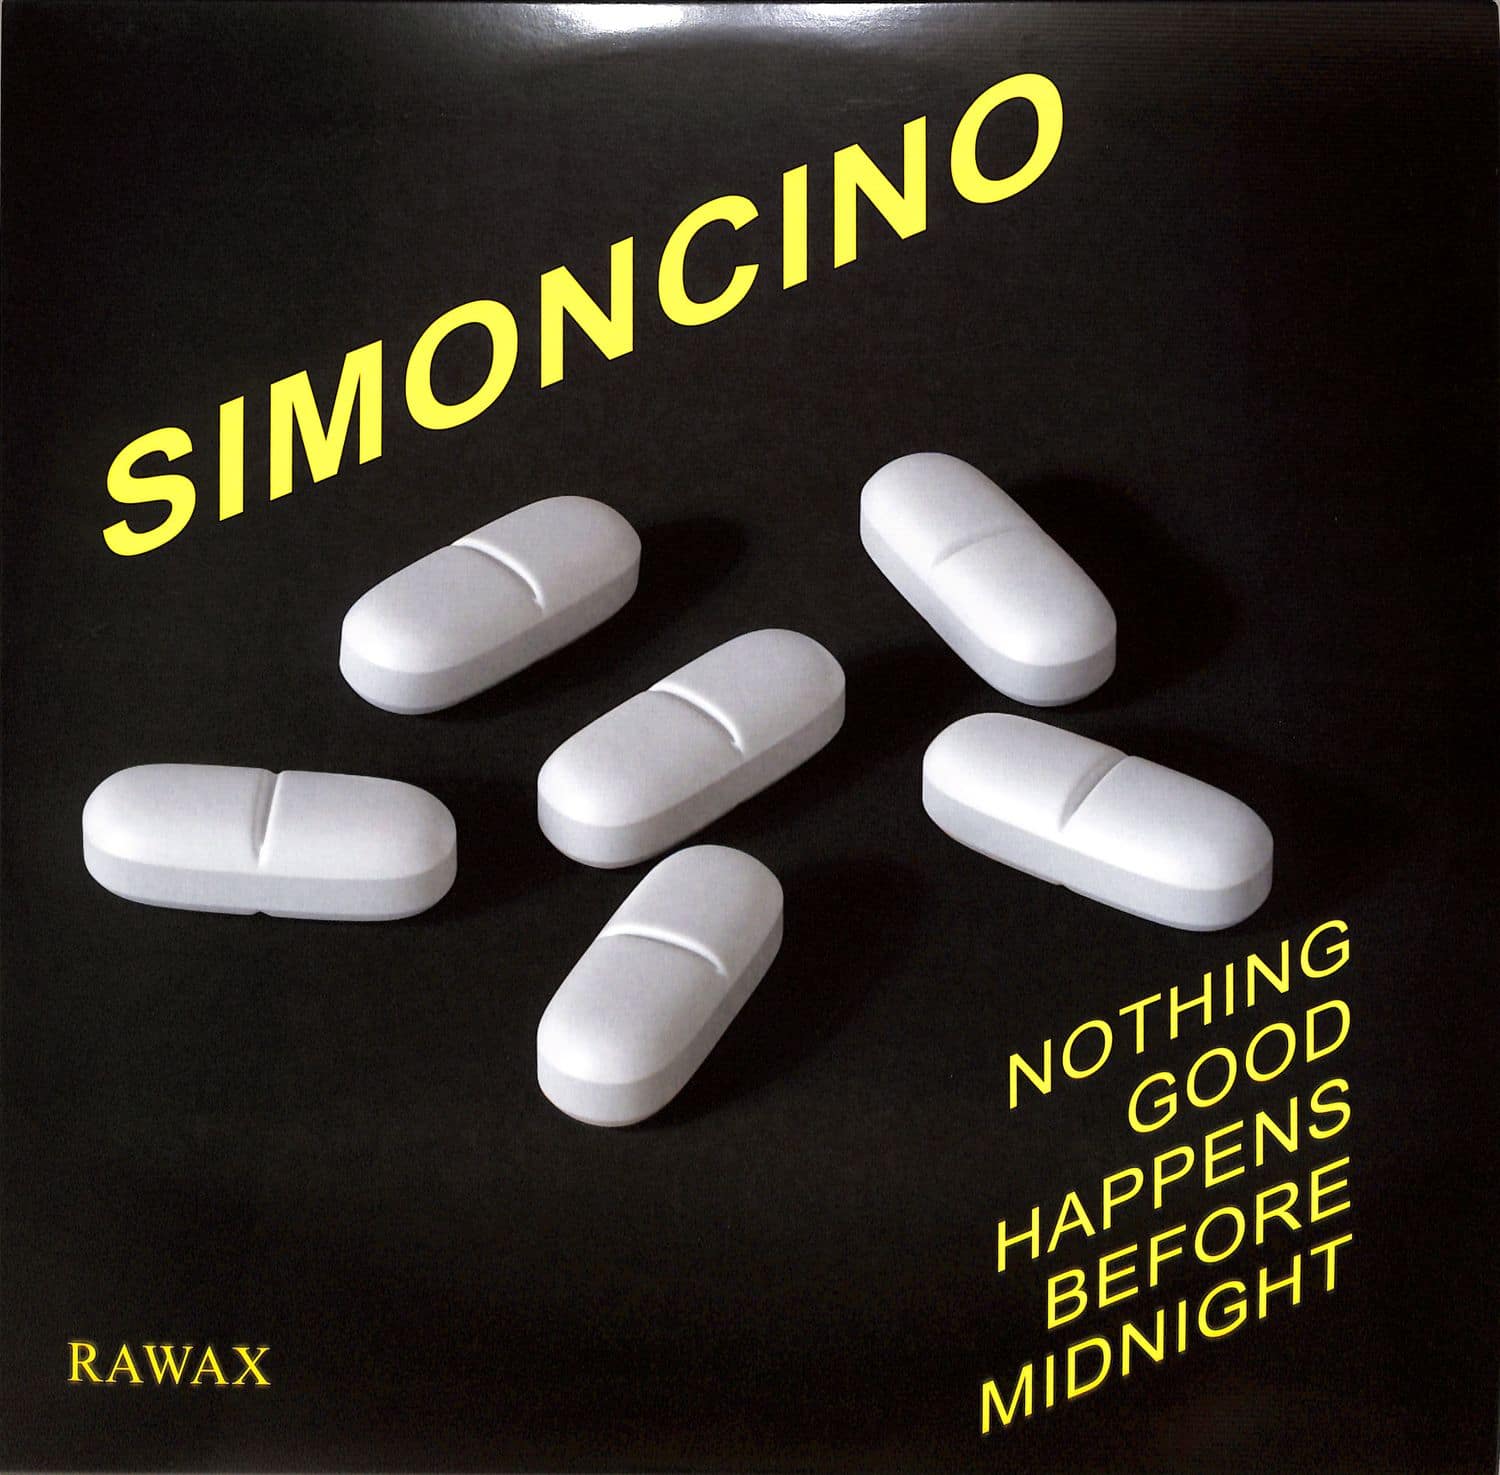 Simoncino - NOTHING GOOD HAPPENS BEFORE MIDNIGHT 